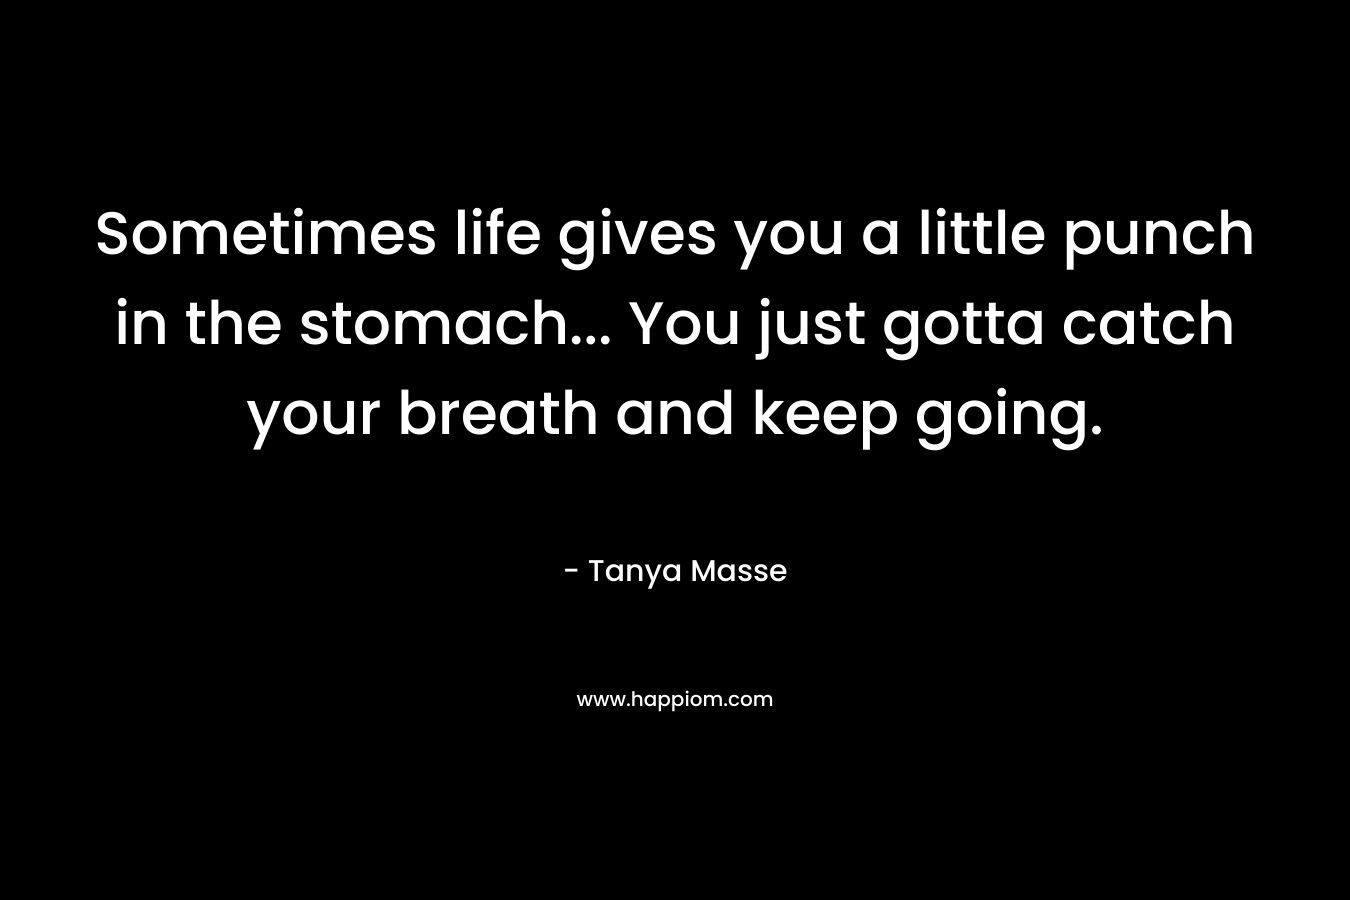 Sometimes life gives you a little punch in the stomach... You just gotta catch your breath and keep going.